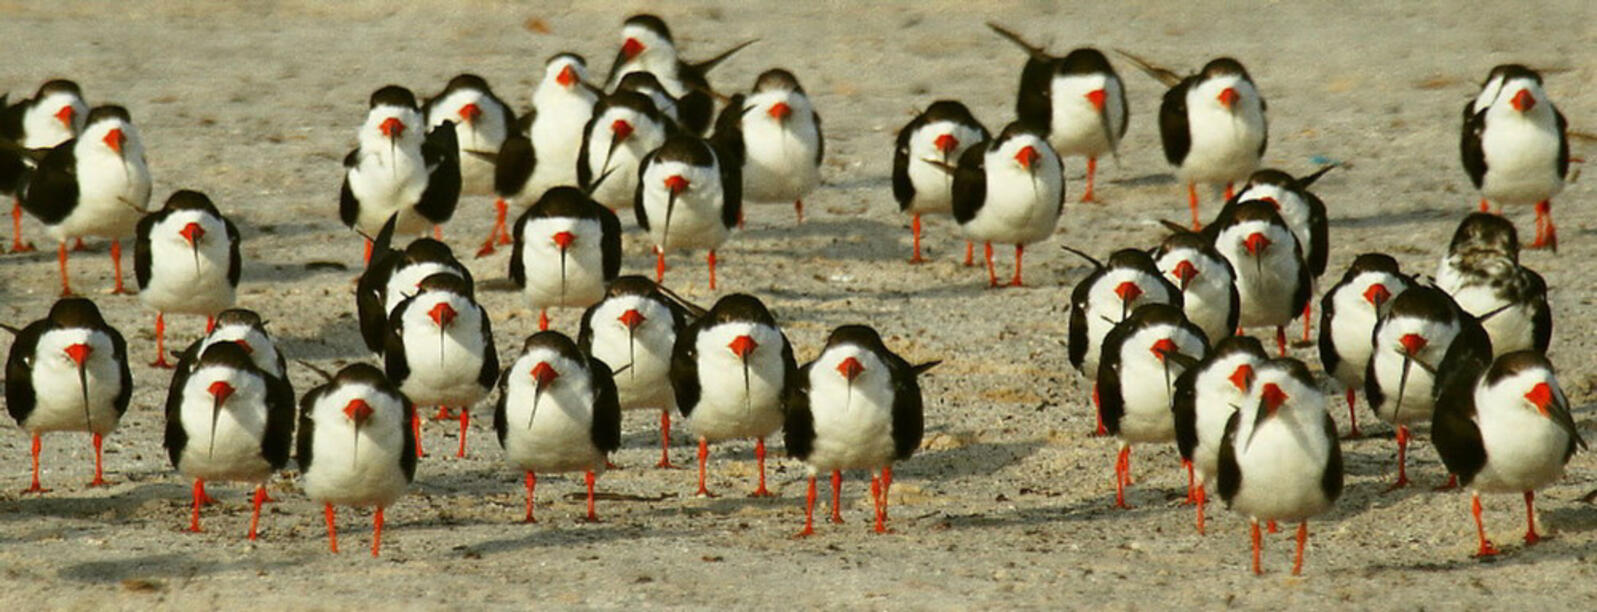 A group of black and white birds on a beach face the camera